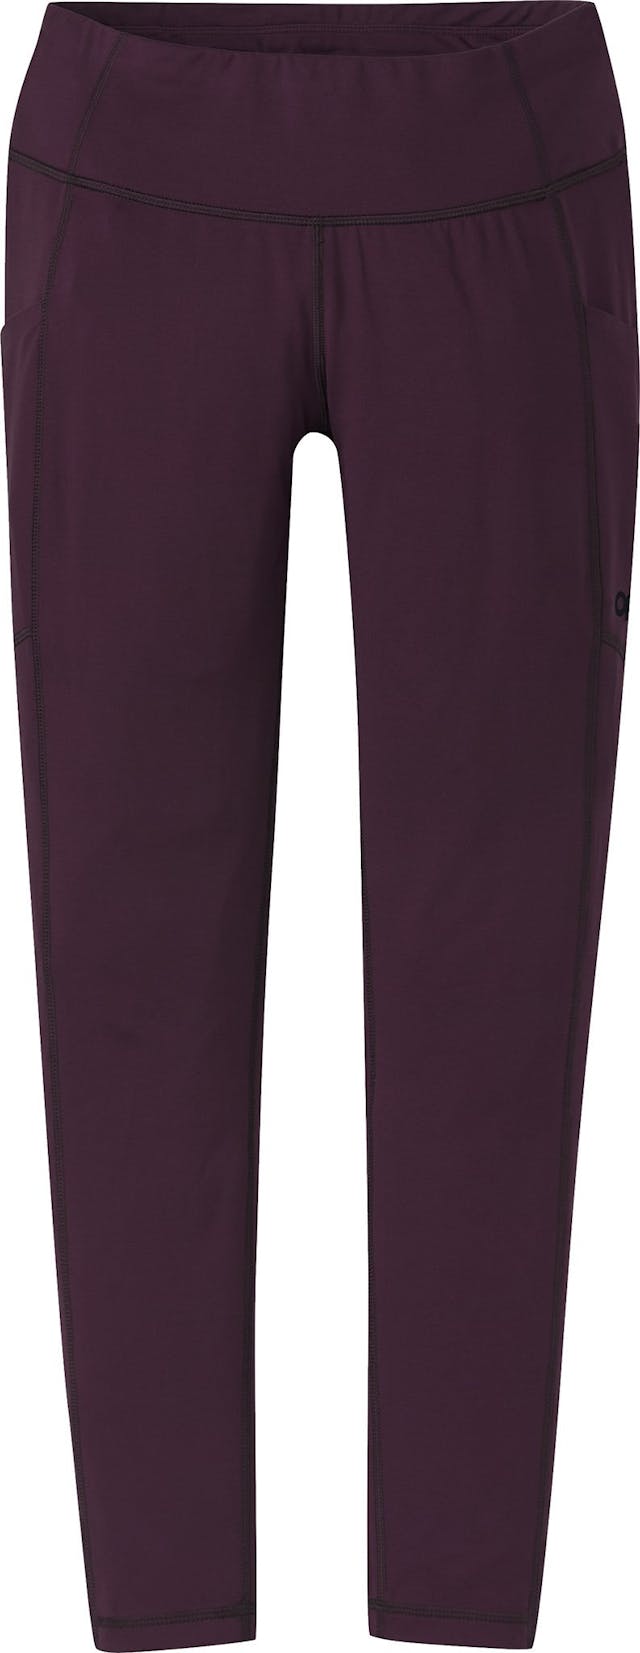 Product image for Melody 7/8 Leggings - Women's